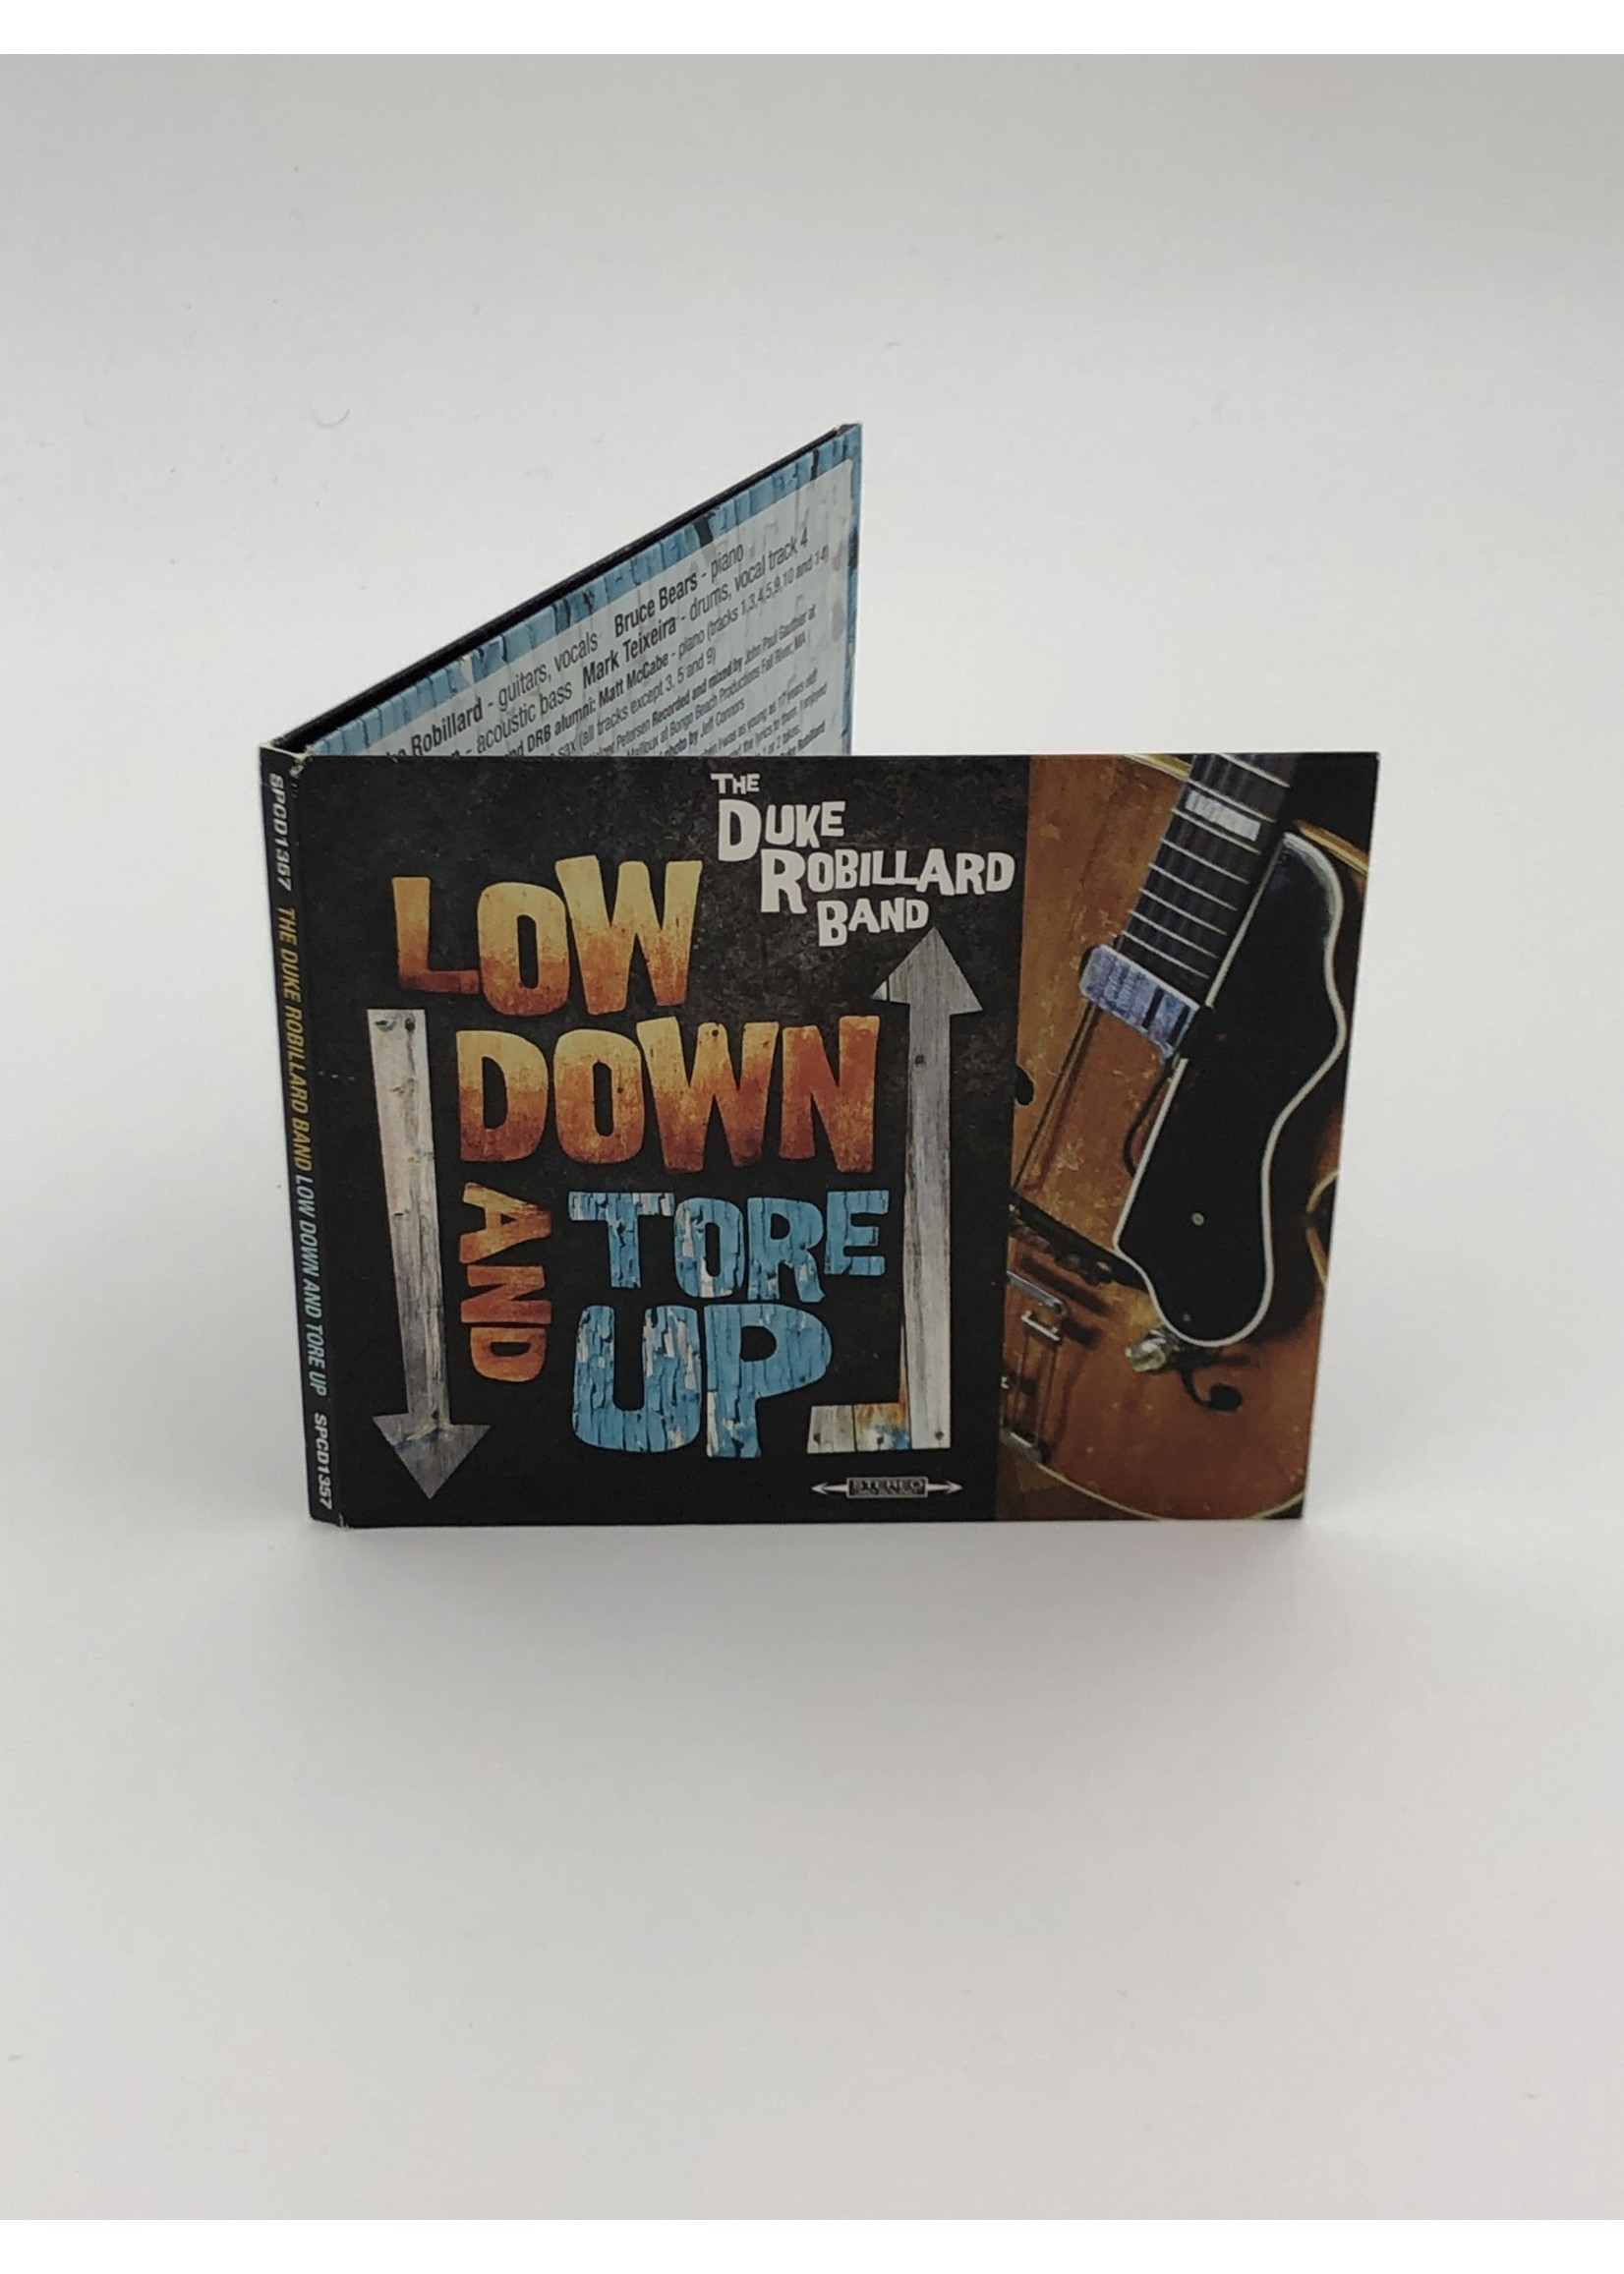 CD The Duke Robillard Band Low Down and Tore Up CD